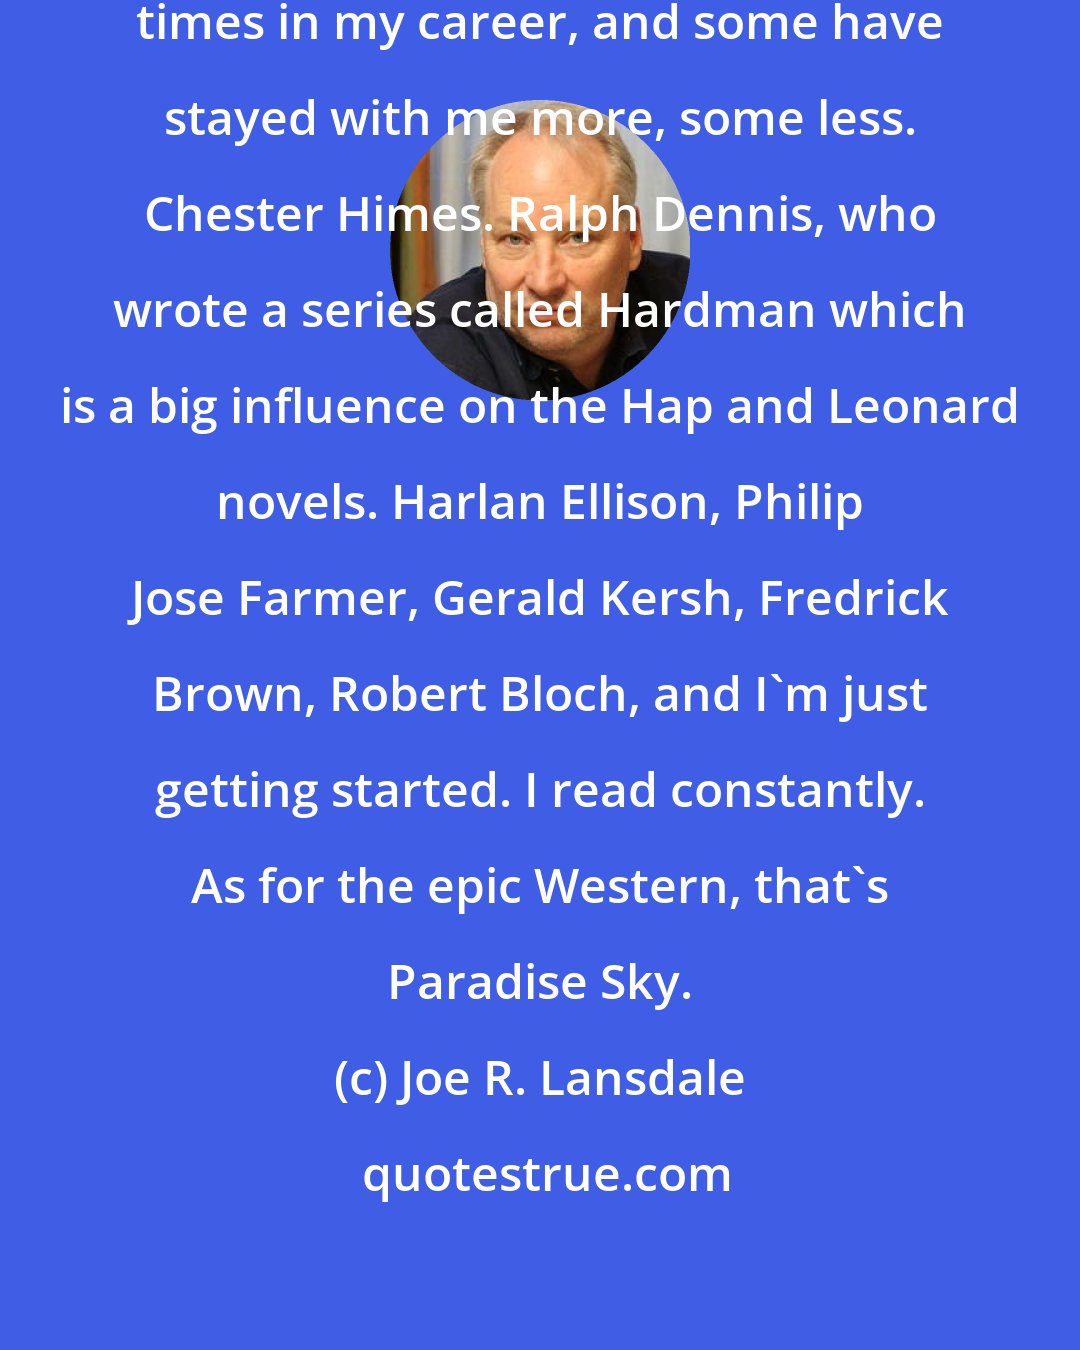 Joe R. Lansdale: Different influences at different times in my career, and some have stayed with me more, some less. Chester Himes. Ralph Dennis, who wrote a series called Hardman which is a big influence on the Hap and Leonard novels. Harlan Ellison, Philip Jose Farmer, Gerald Kersh, Fredrick Brown, Robert Bloch, and I'm just getting started. I read constantly. As for the epic Western, that's Paradise Sky.